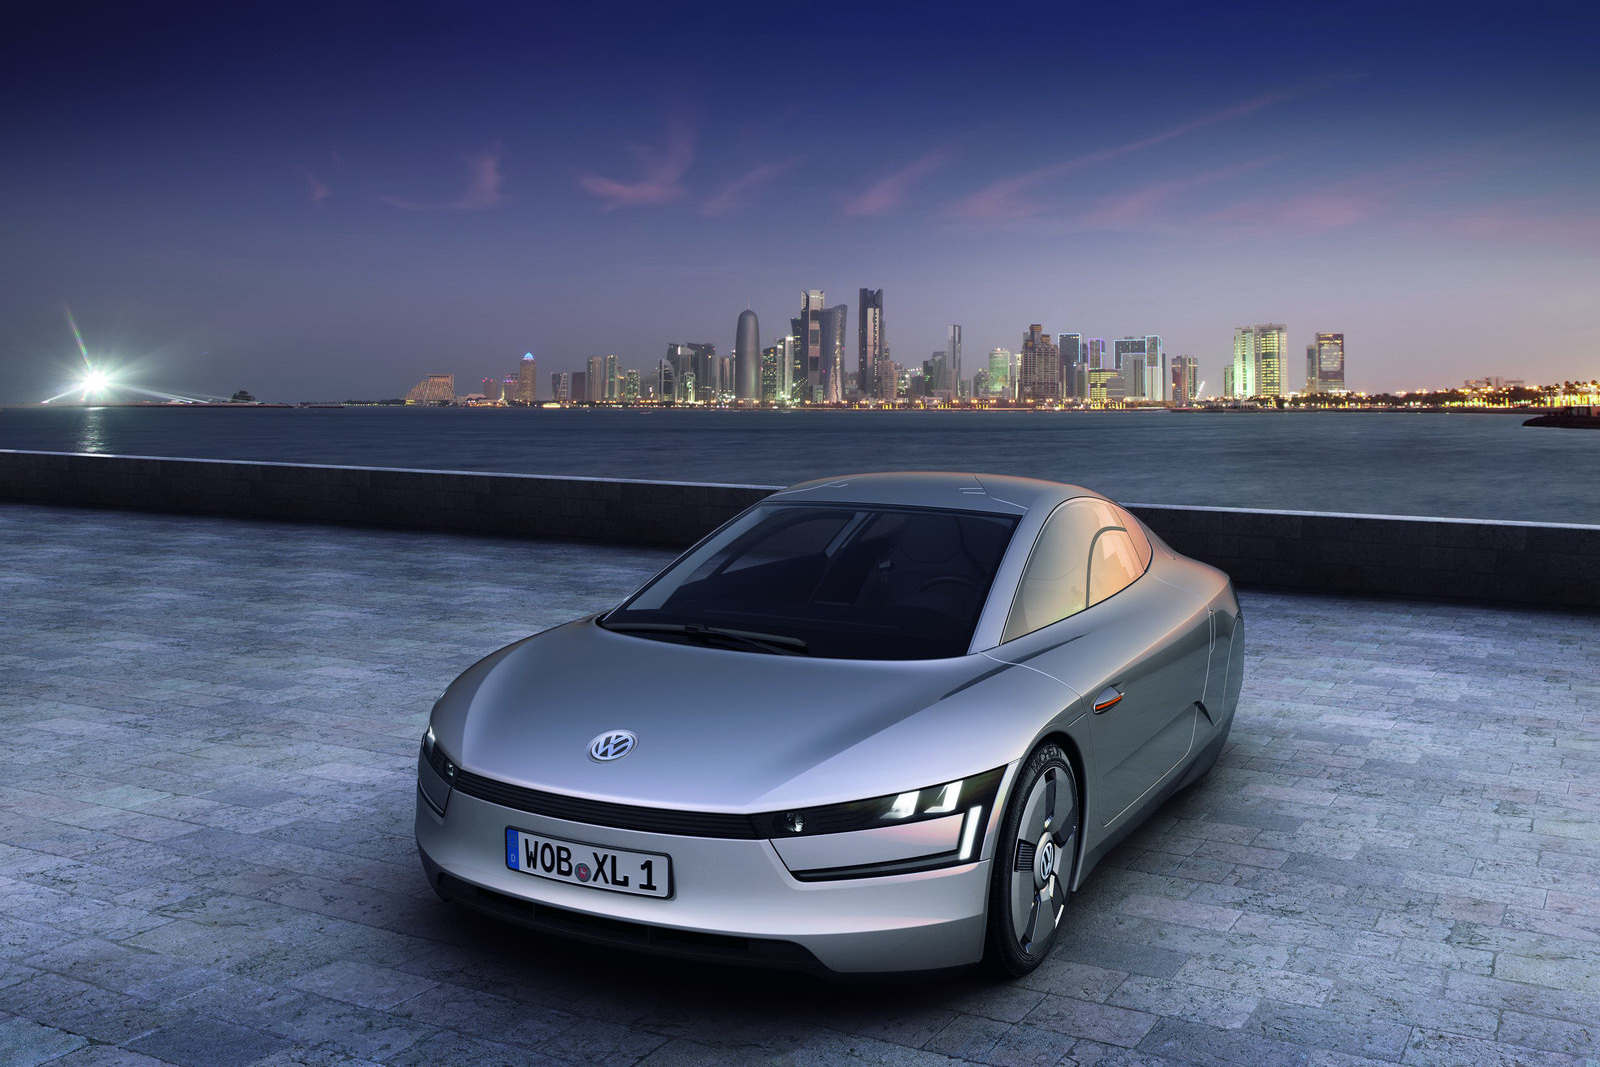 VW research chief declined to announce the EV’s range